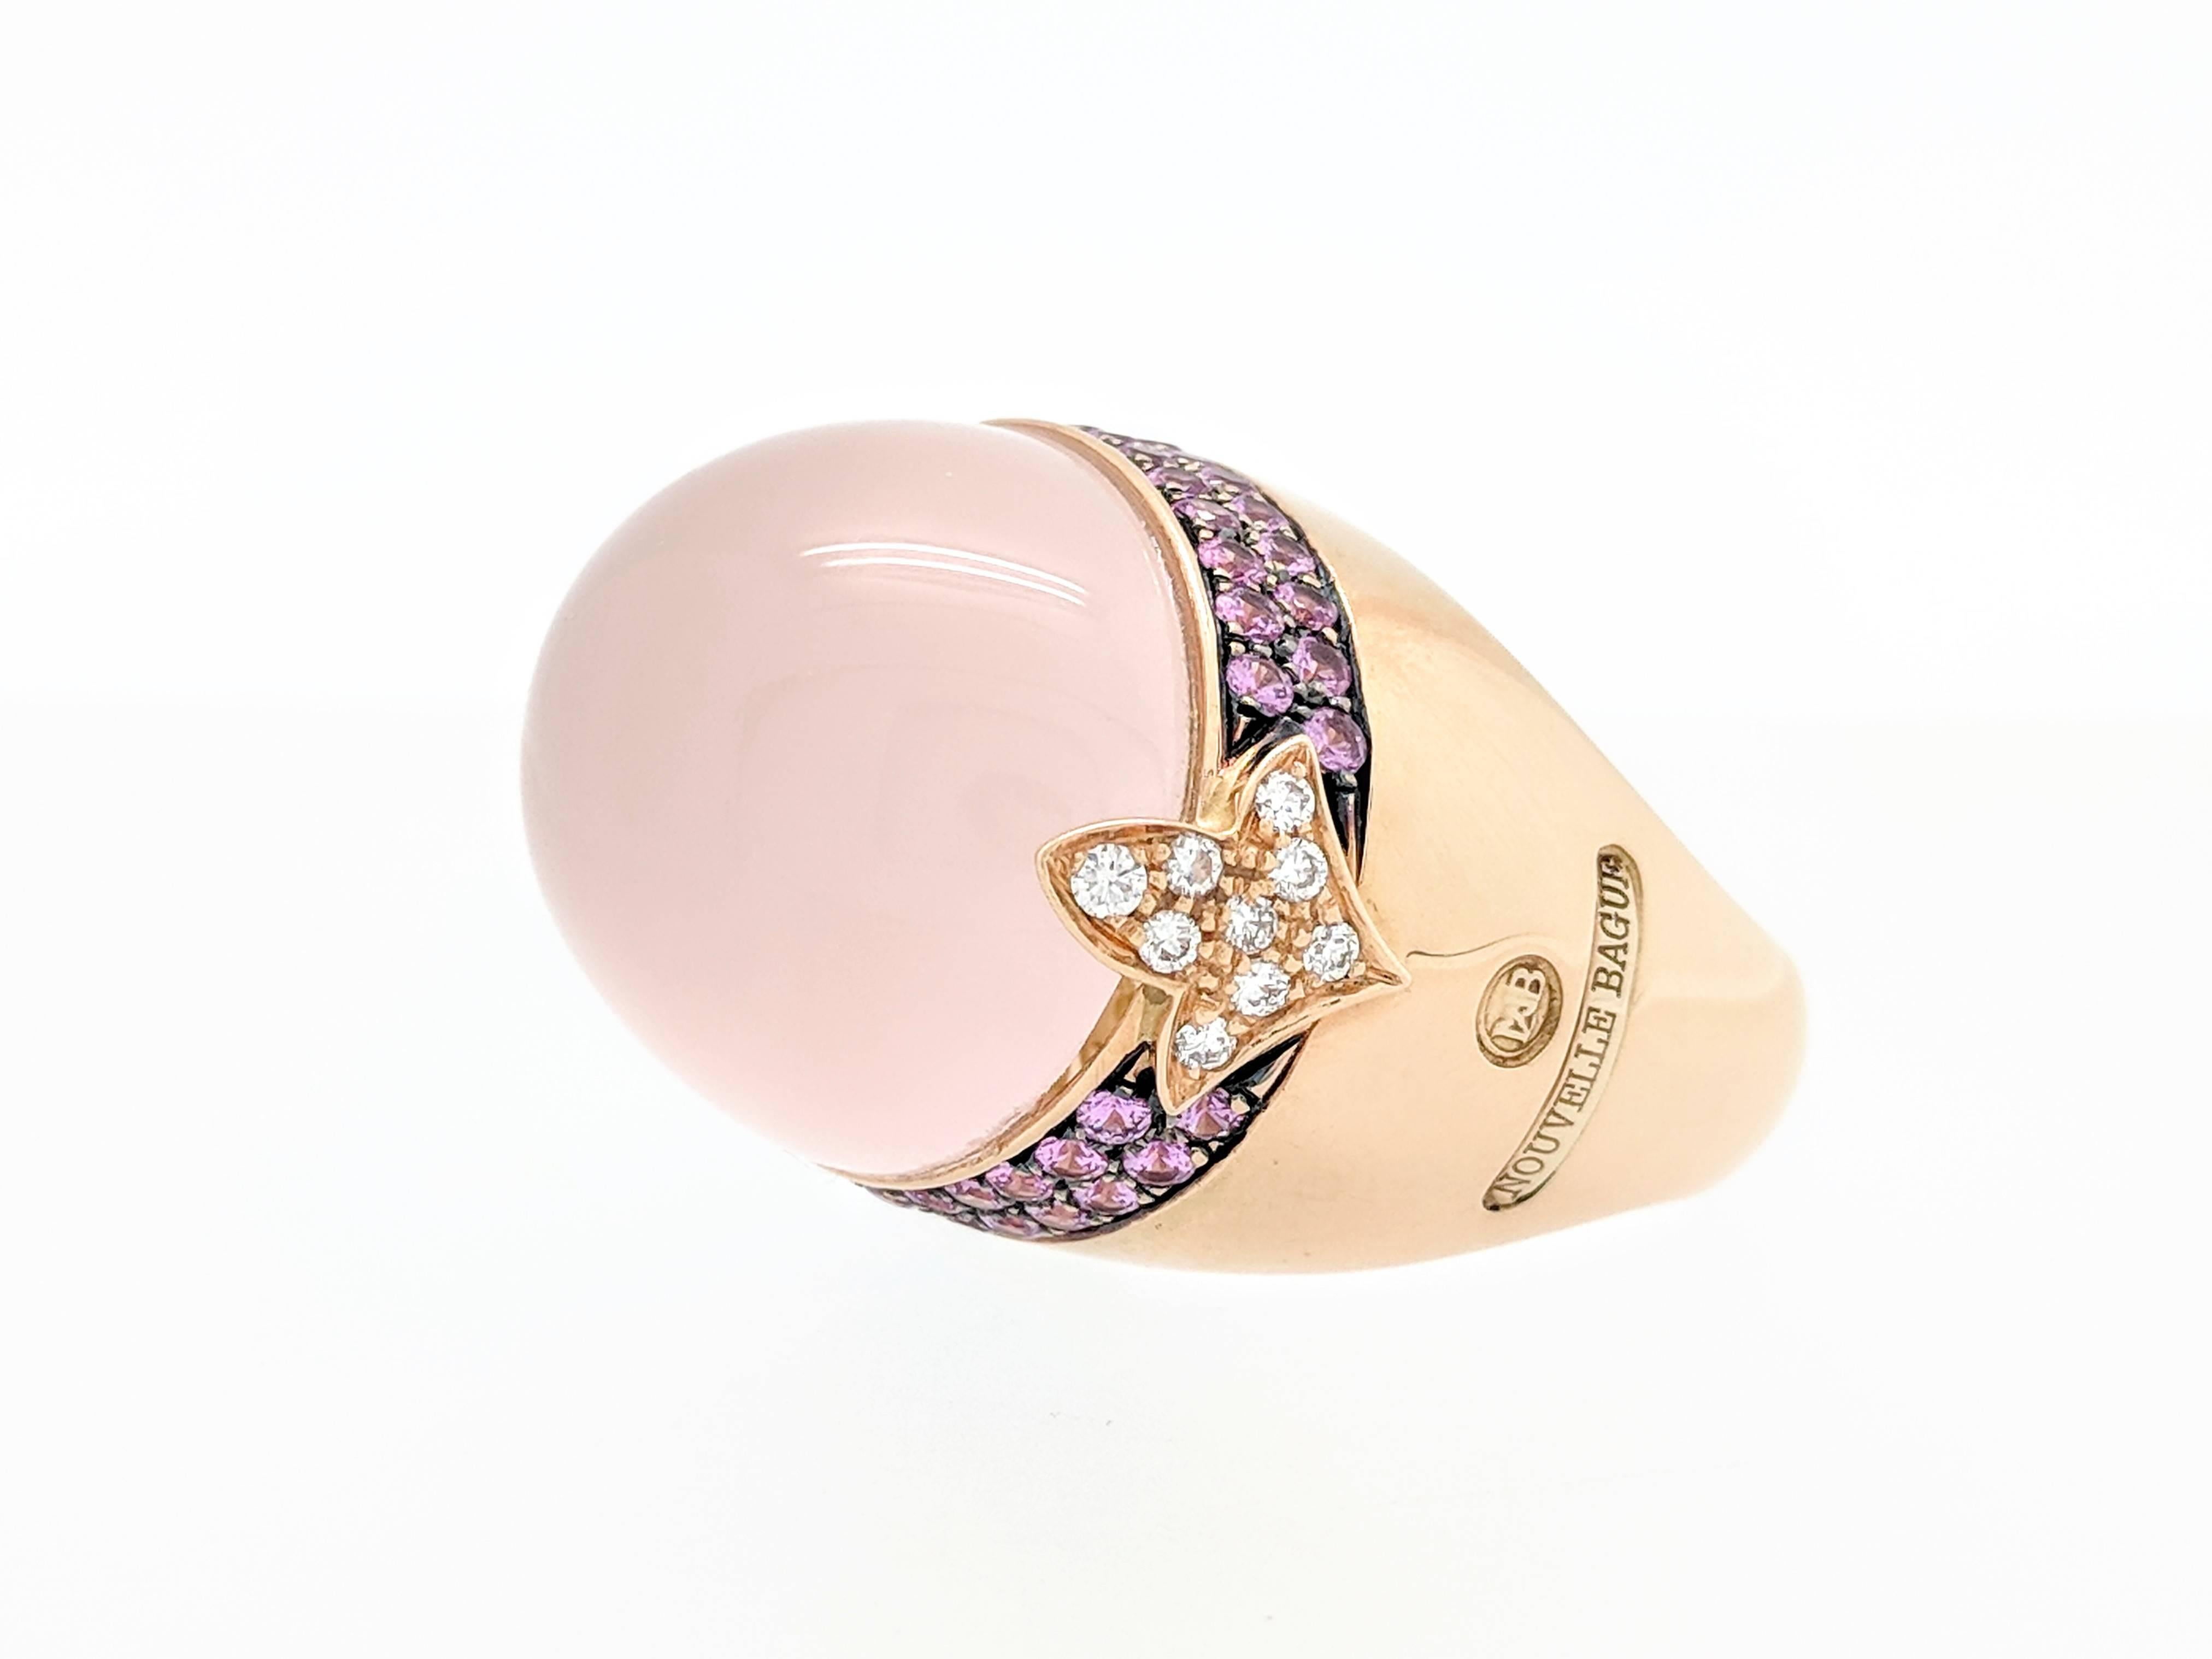 Nouvelle Bague 18 Karat Gold Cabochon Coral Pink Sapphires and Diamond Dome Ring 4